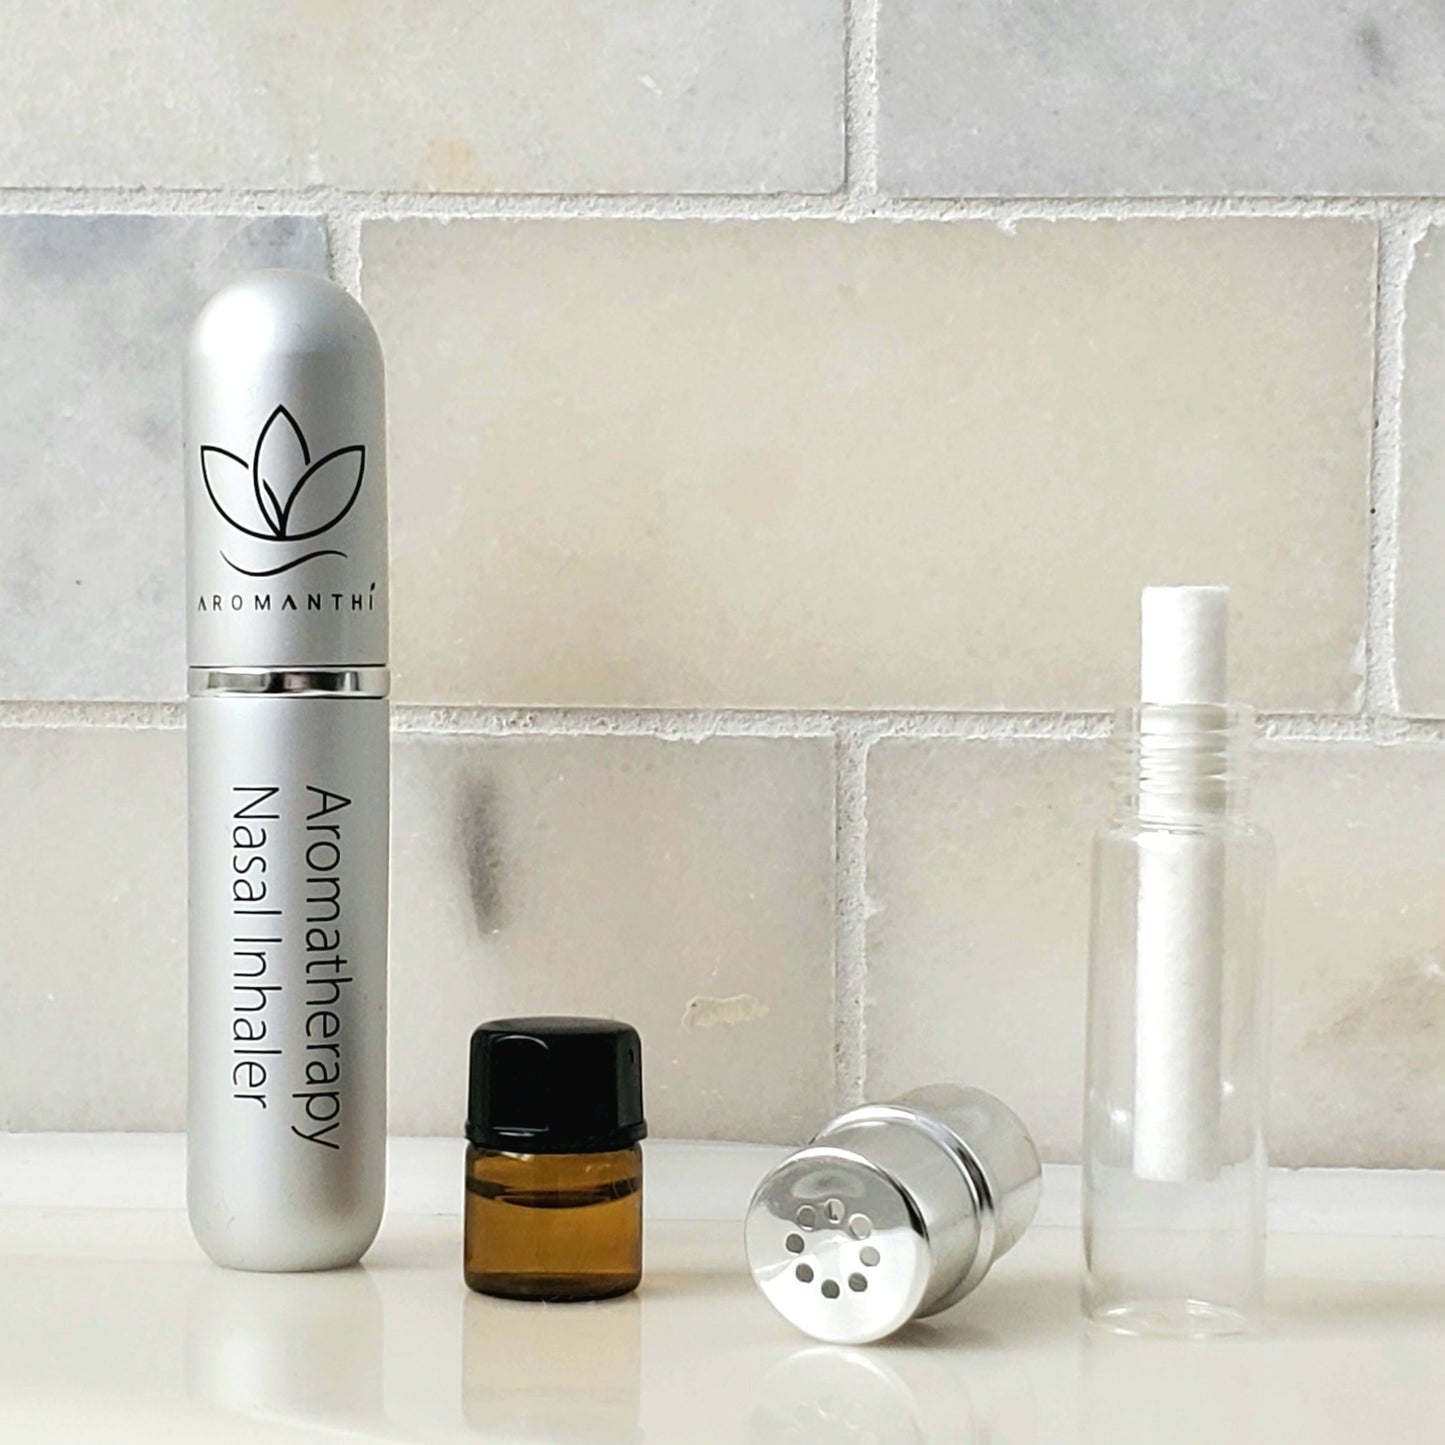 Aromanthi's aromatherapy nasal inhaler comes displayed with the aluminum eco-friendly tube, a glass inhaler insert, your essential oil blend of choice, and a cotton wick